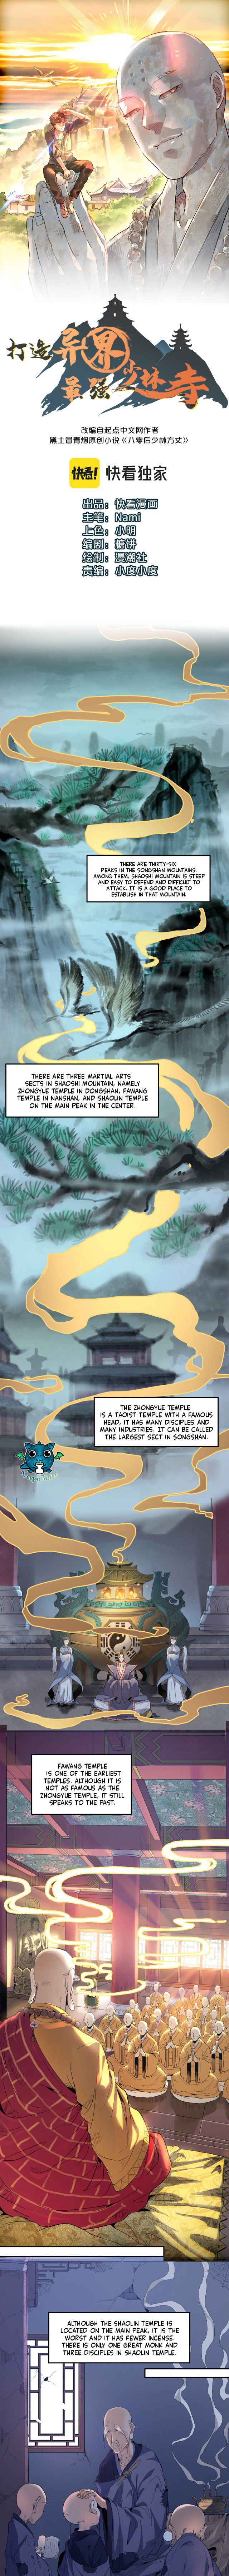 Building The Strongest Shaolin Temple In Another World - Page 2